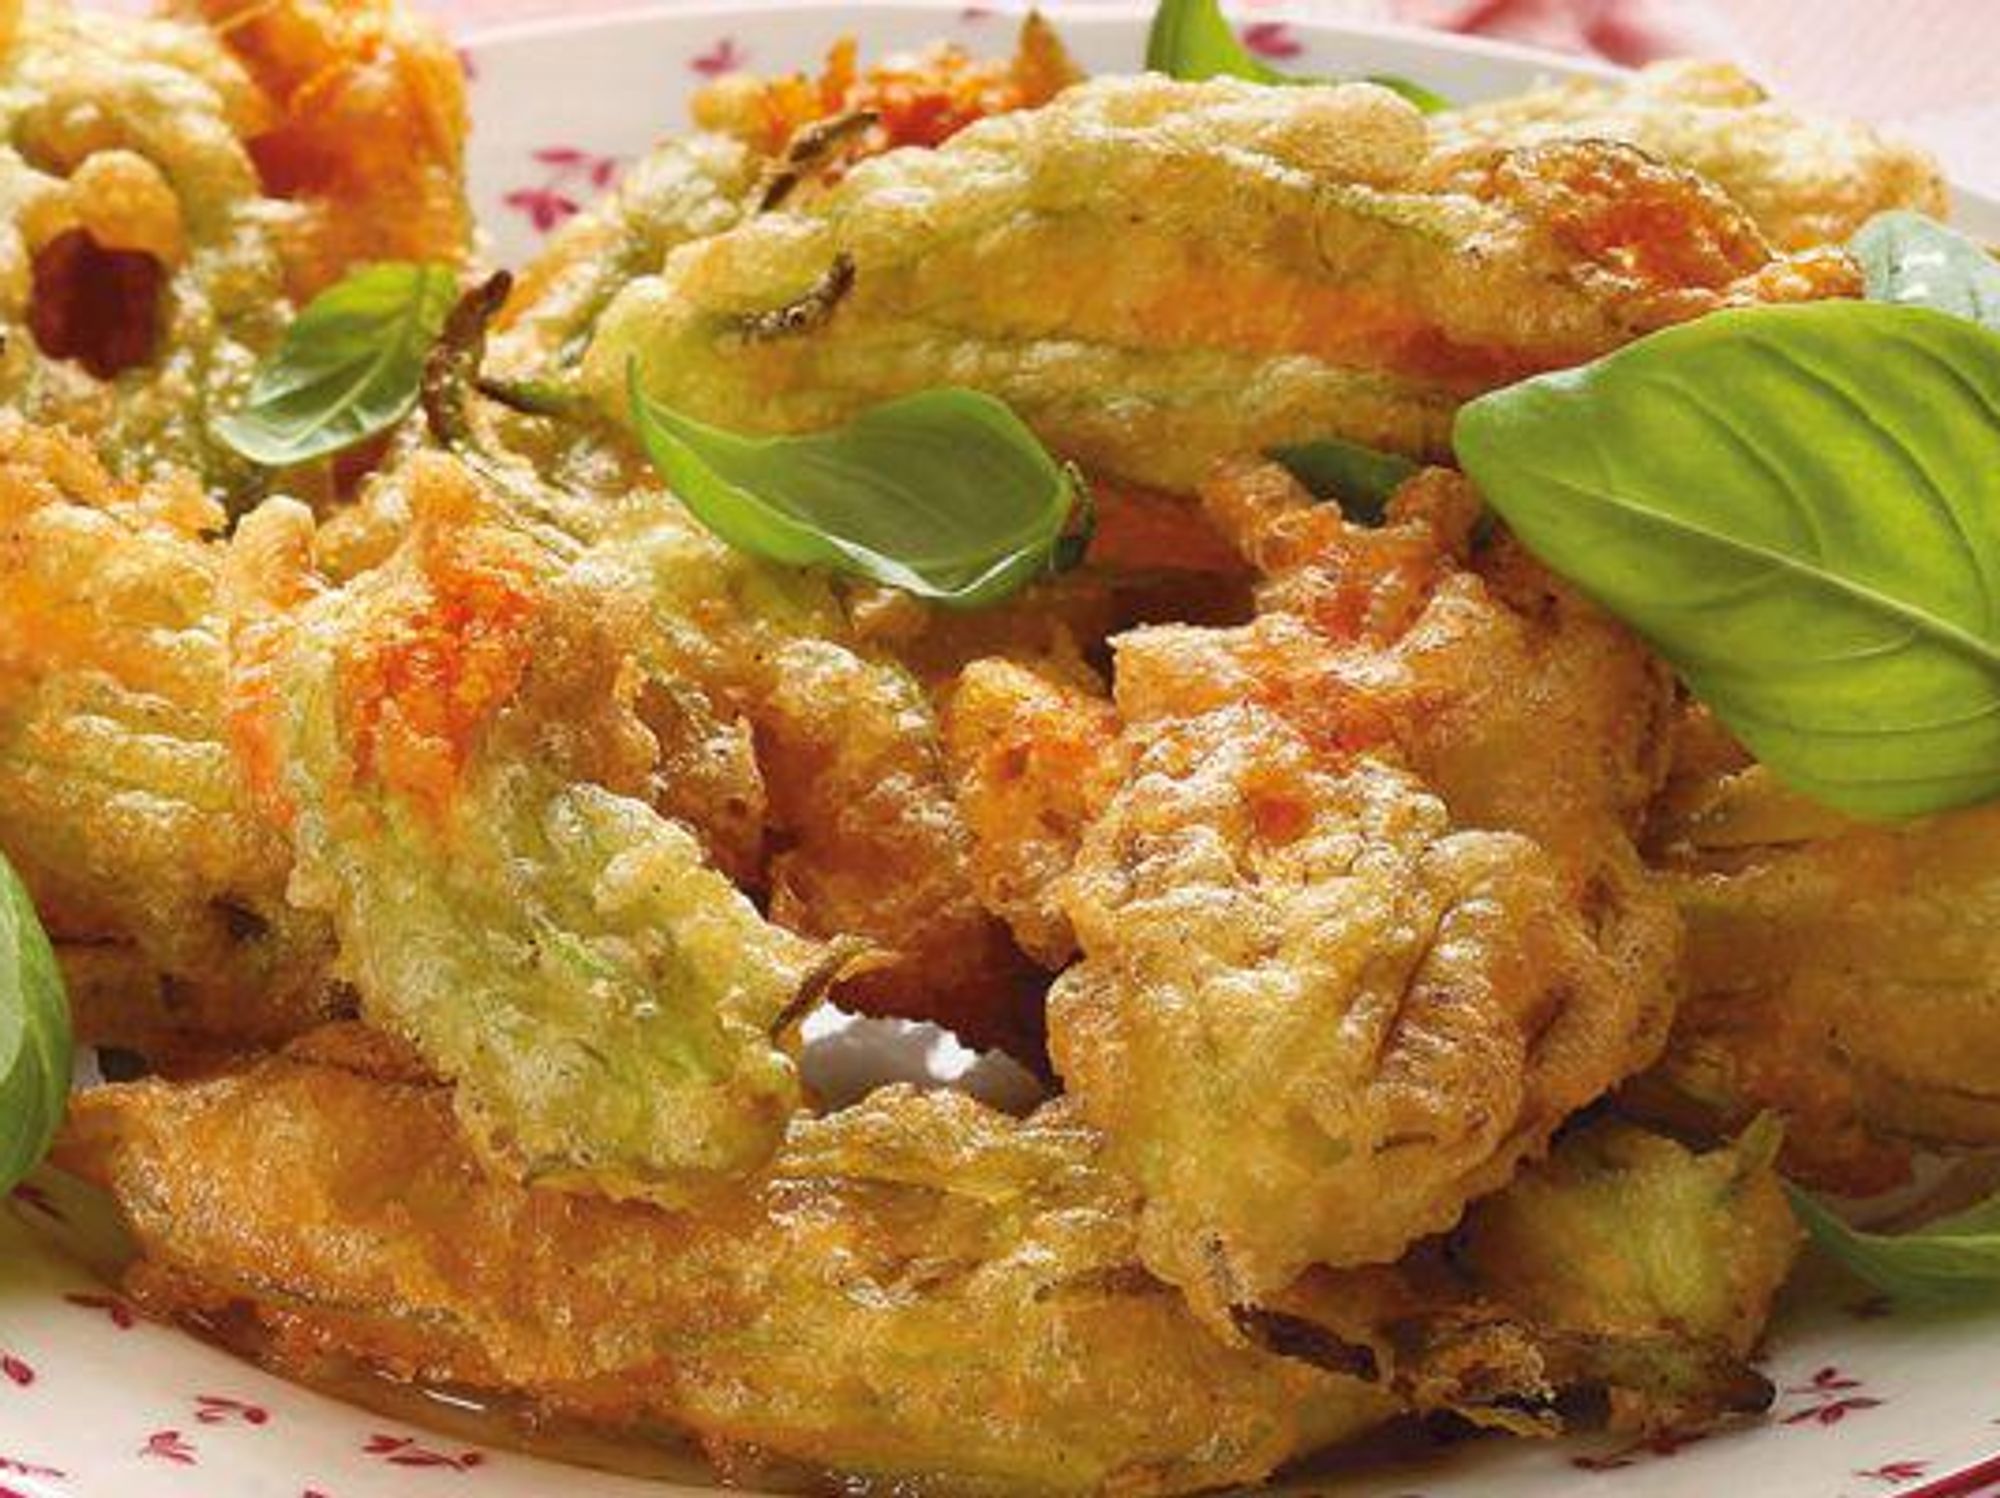 Stuffed courgette flowers with anchovies